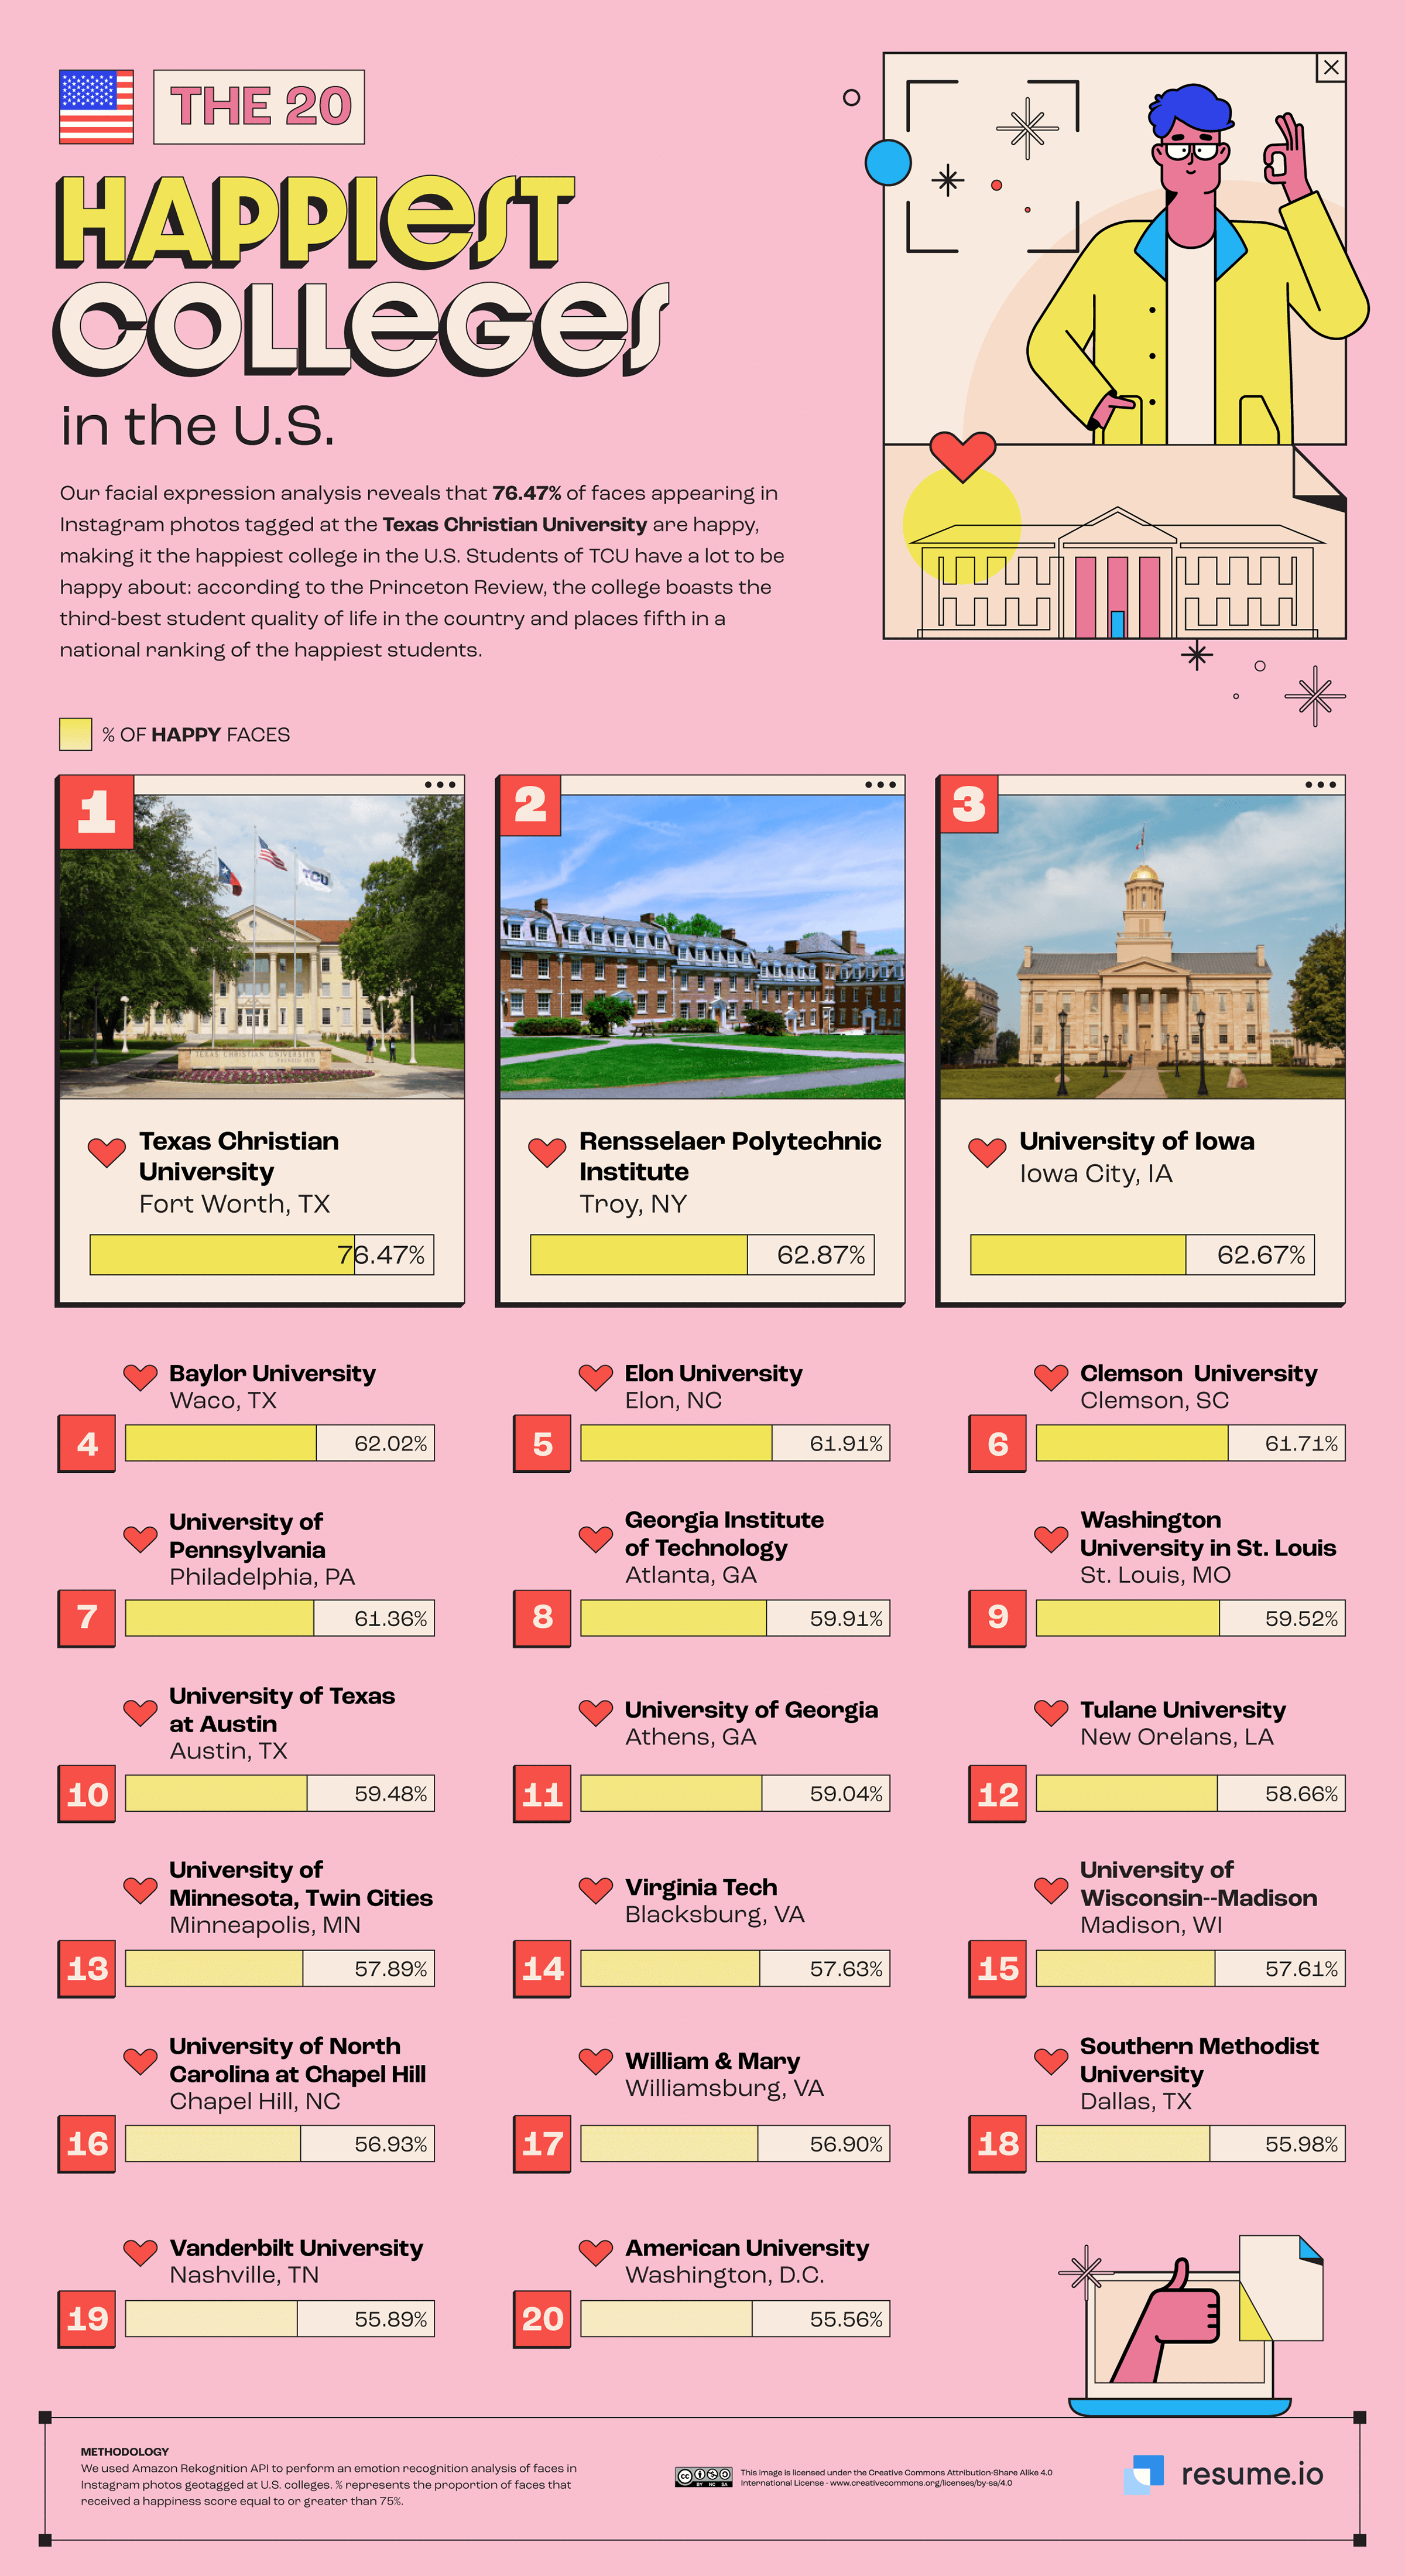 The Happiest Colleges in the US